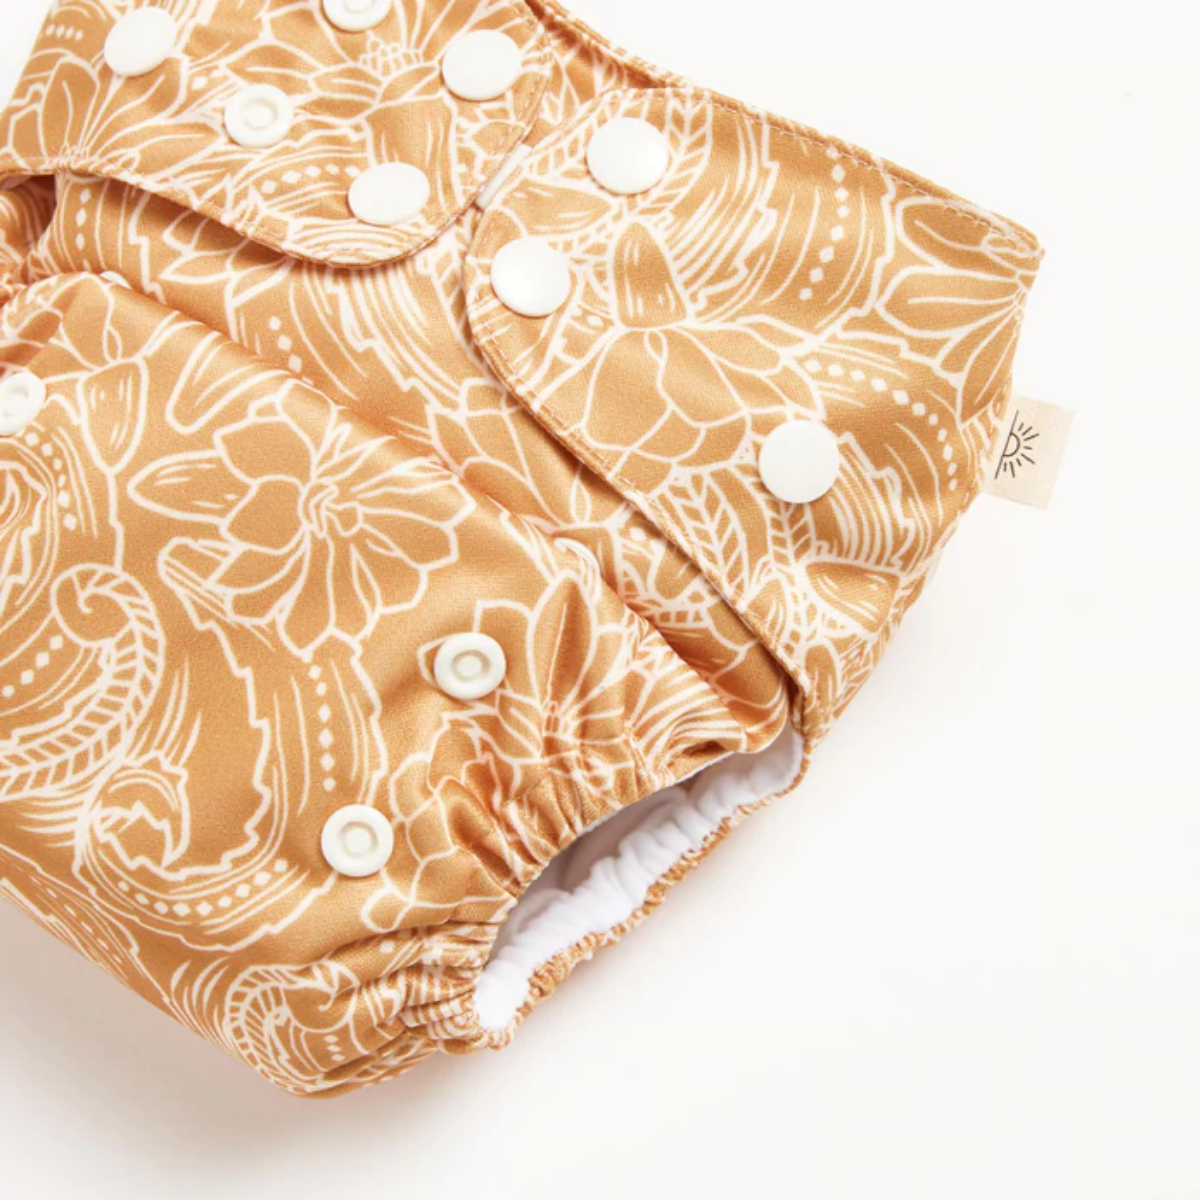 EcoNaps new and improved 2.0 nappy is the first plastic neutral reusable nappy, certified by Plastic Bank. Made from rPET recycled polyester and ultra-absorbent bamboo, EcoNaps are the perfect, easy-to-use cloth nappy solution that is gentle on your baby, and gentle on the planet.